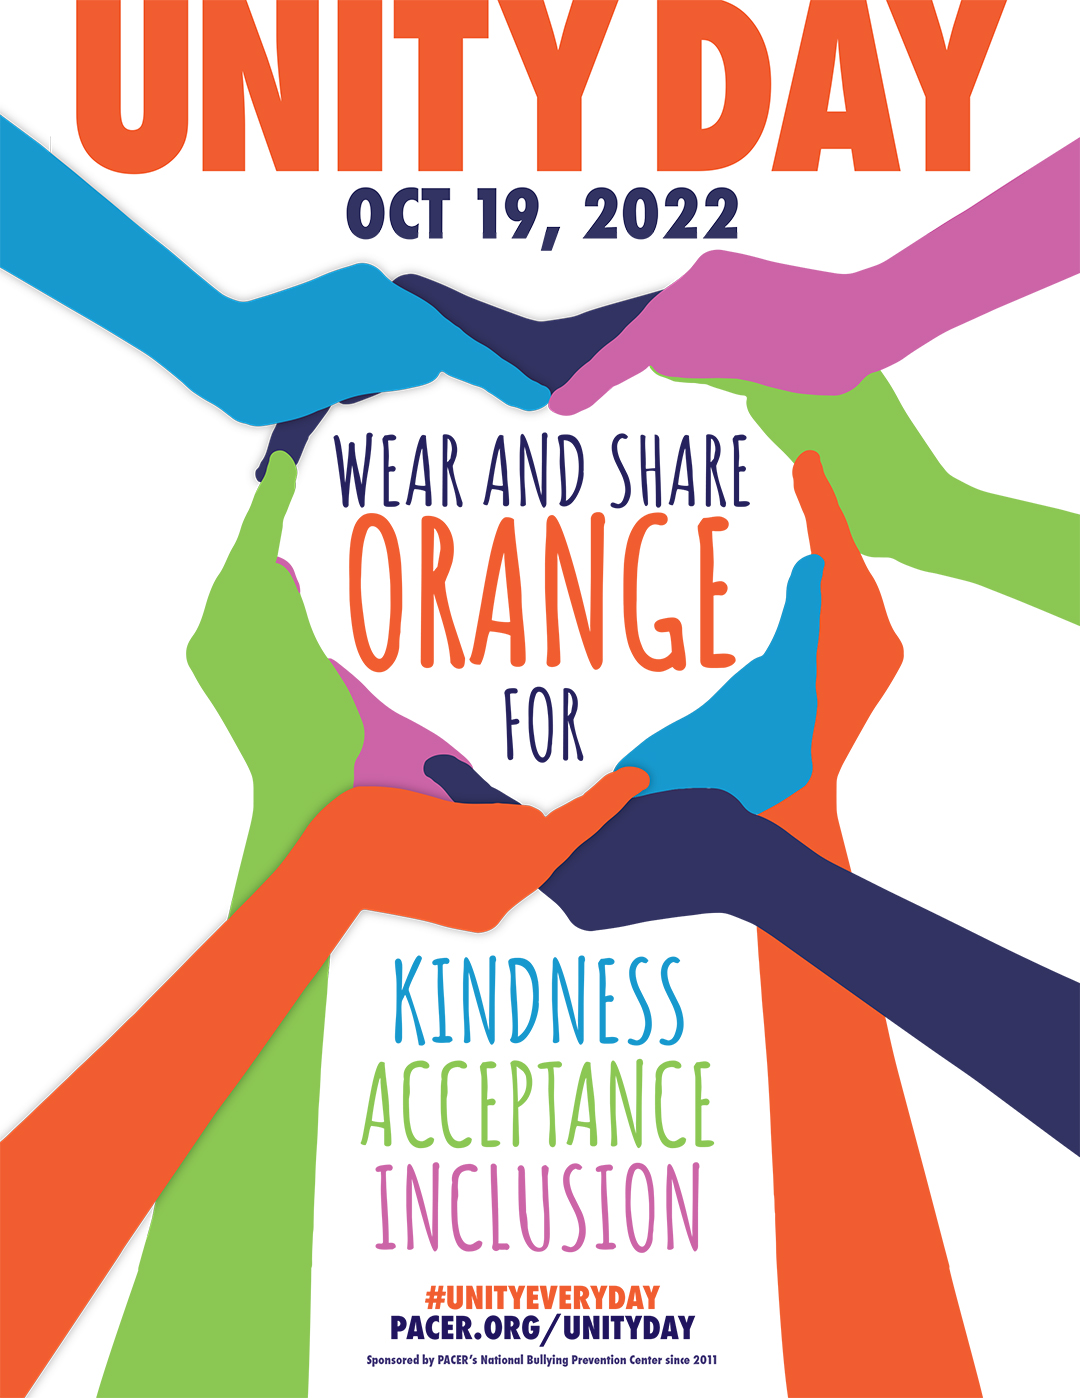 RxSmile supports Unity Day 2022